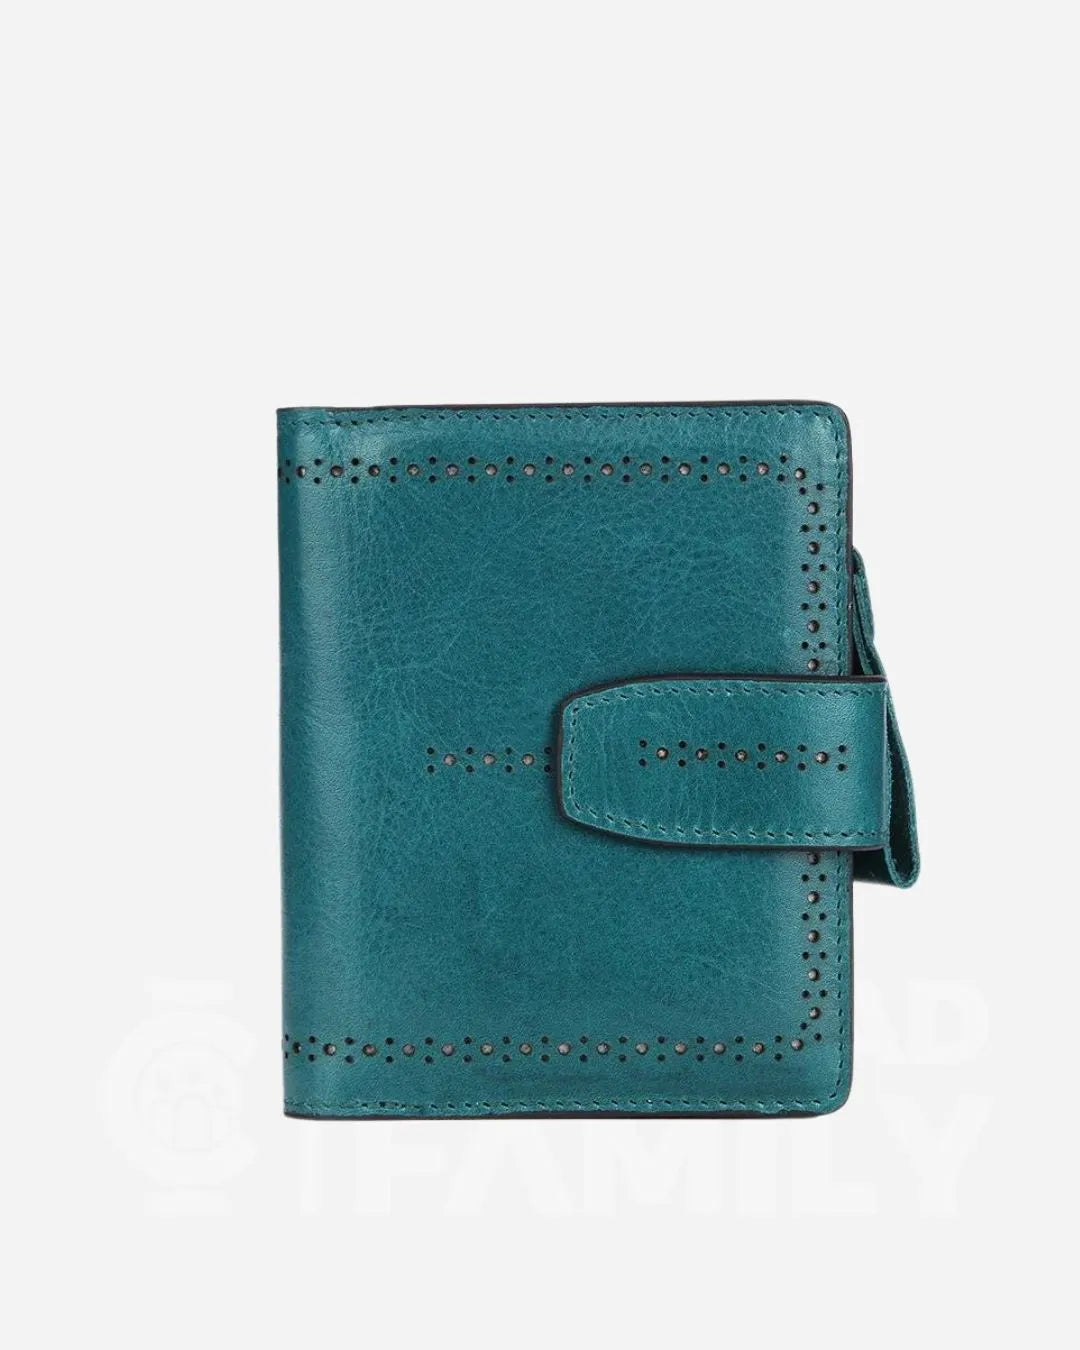 RFID Blocking Leather Wallet in blue with unique design